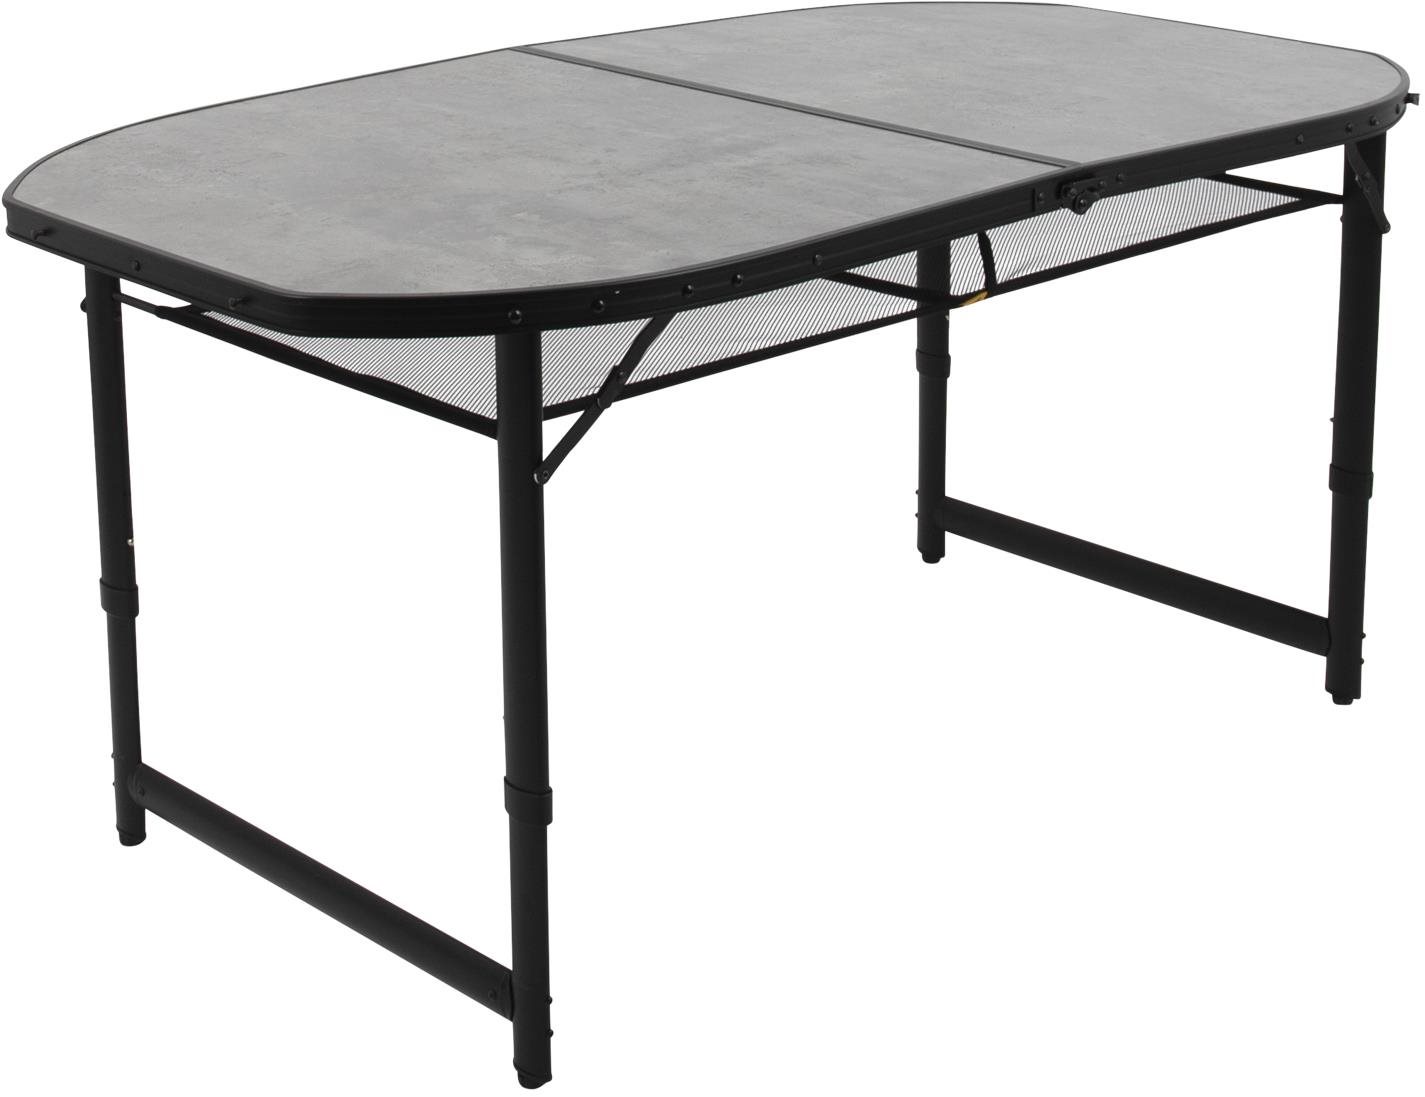 Bo-Camp Industrial Table Northgate Oval Case Model 150x80 cm